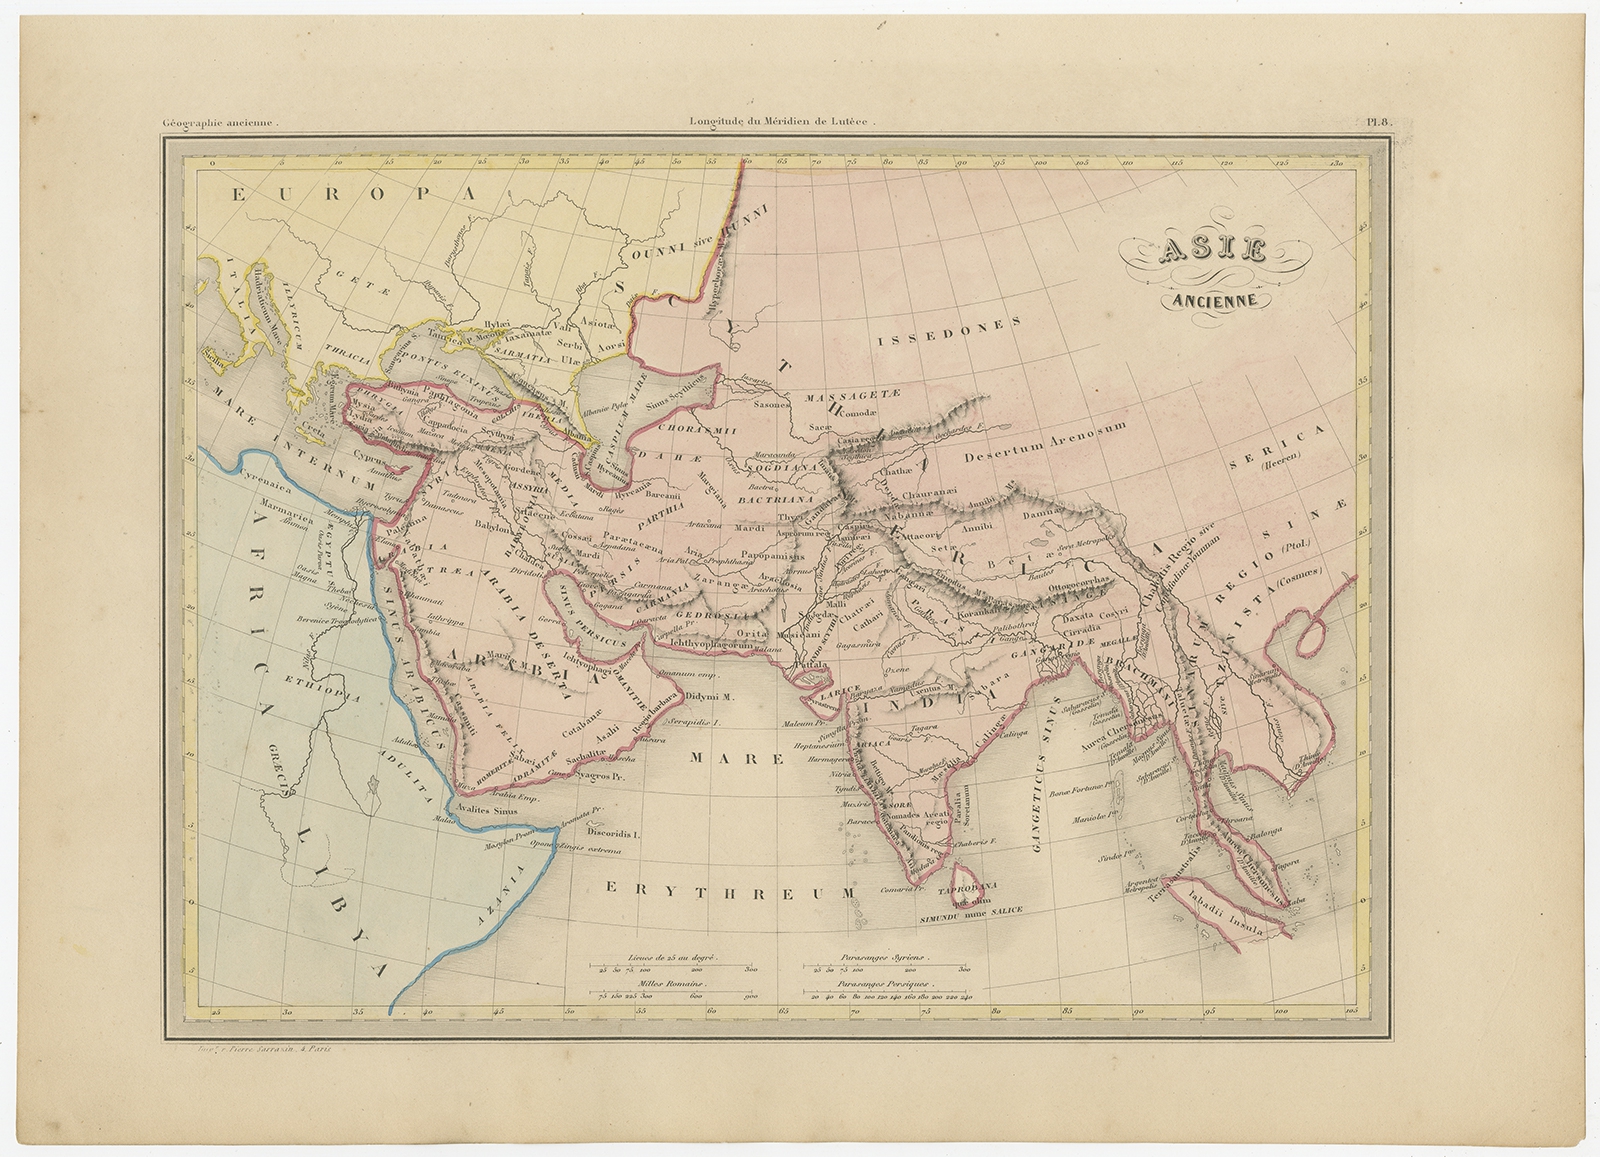 Antique Map Of Ancient Asia By Malte Brun 1847 